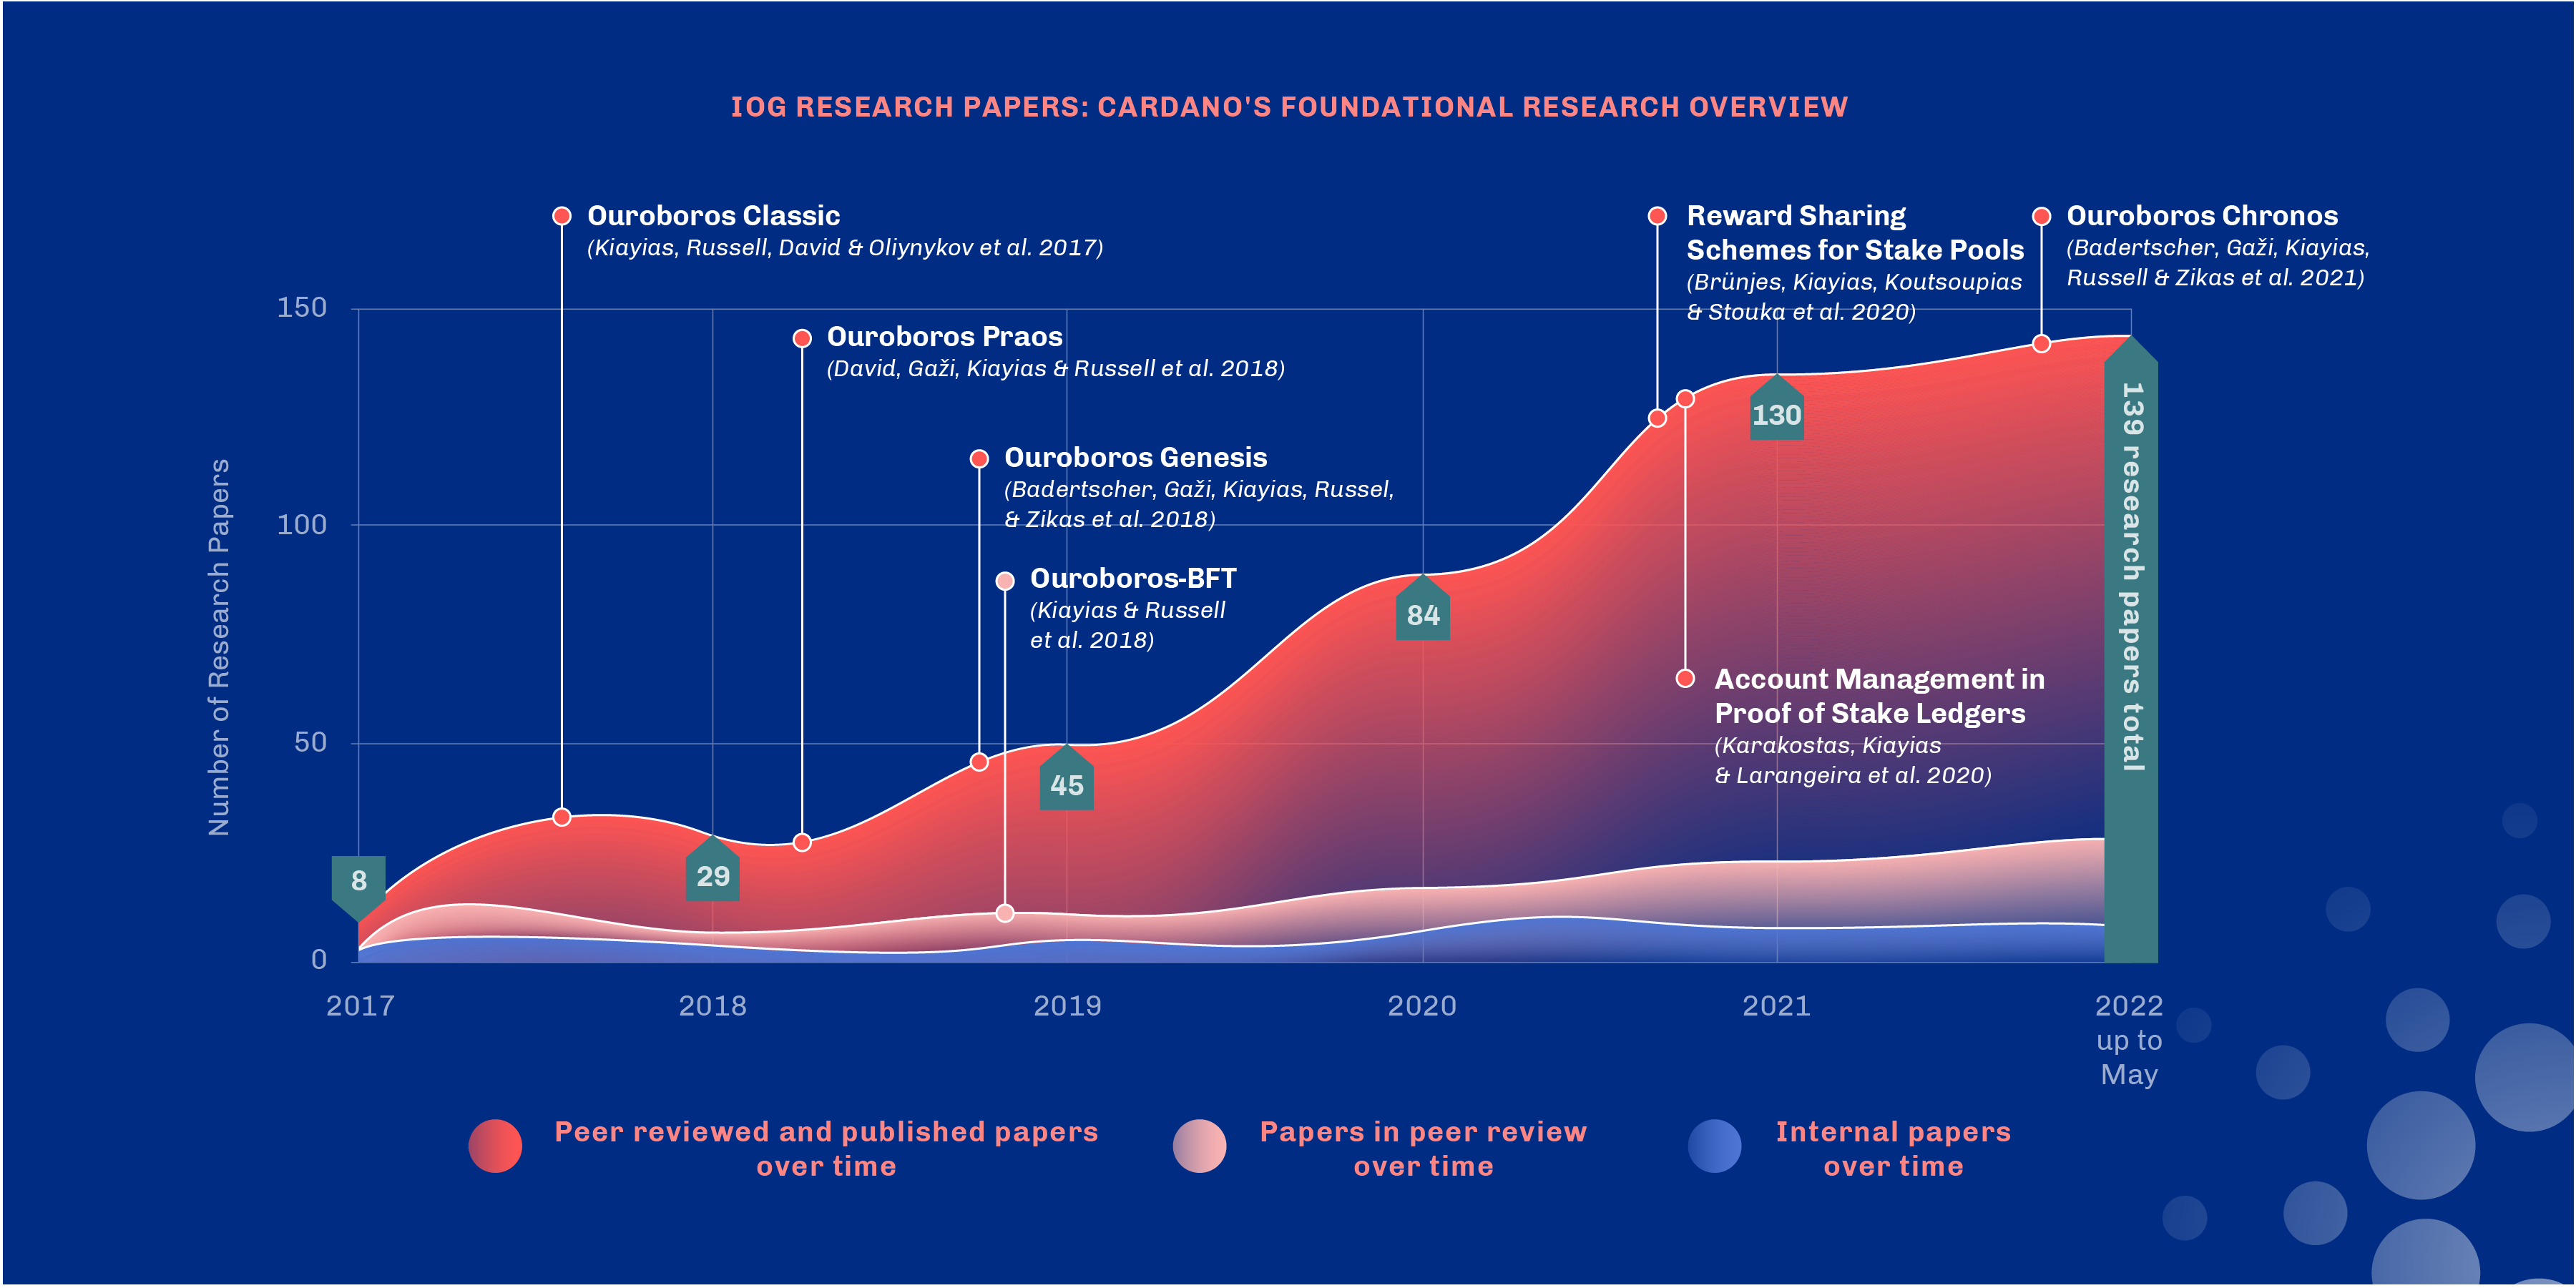 Cardano's foundational research overview